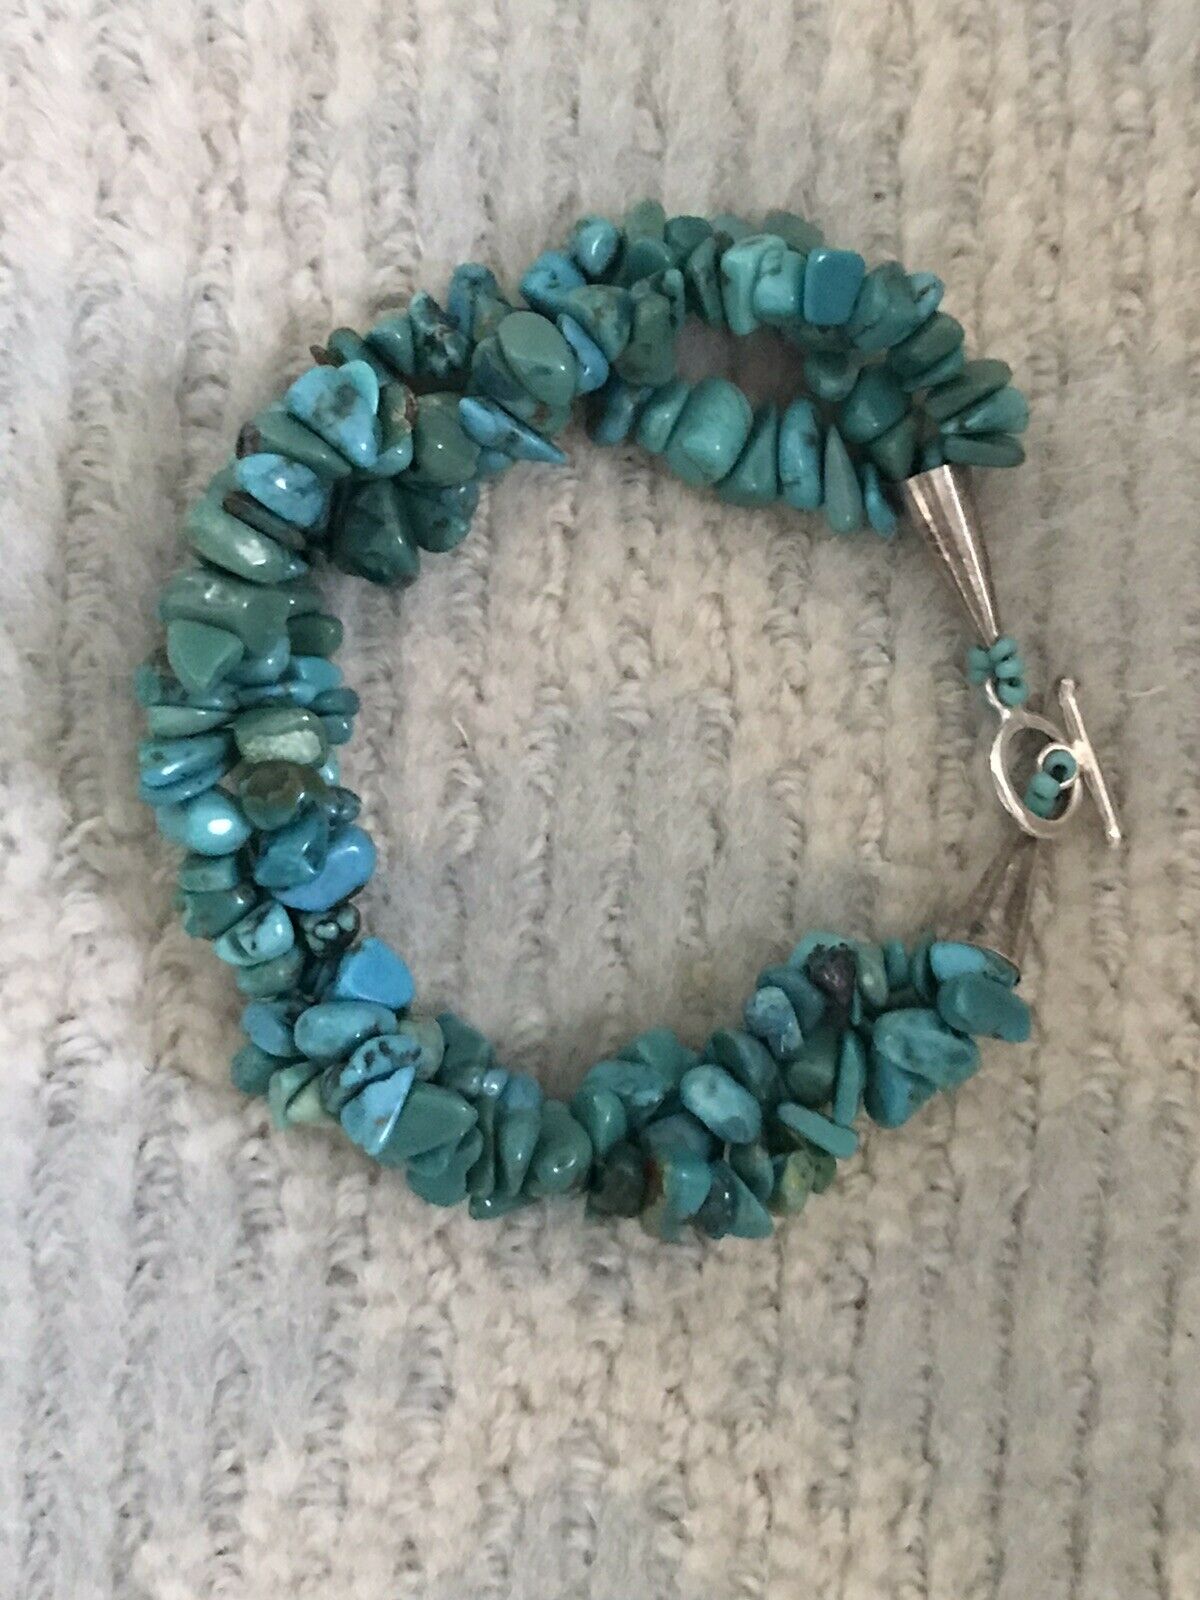 Genuine Turquoise Nugget Bracelet With Sterling Silver Toggle Clasp & End Caps